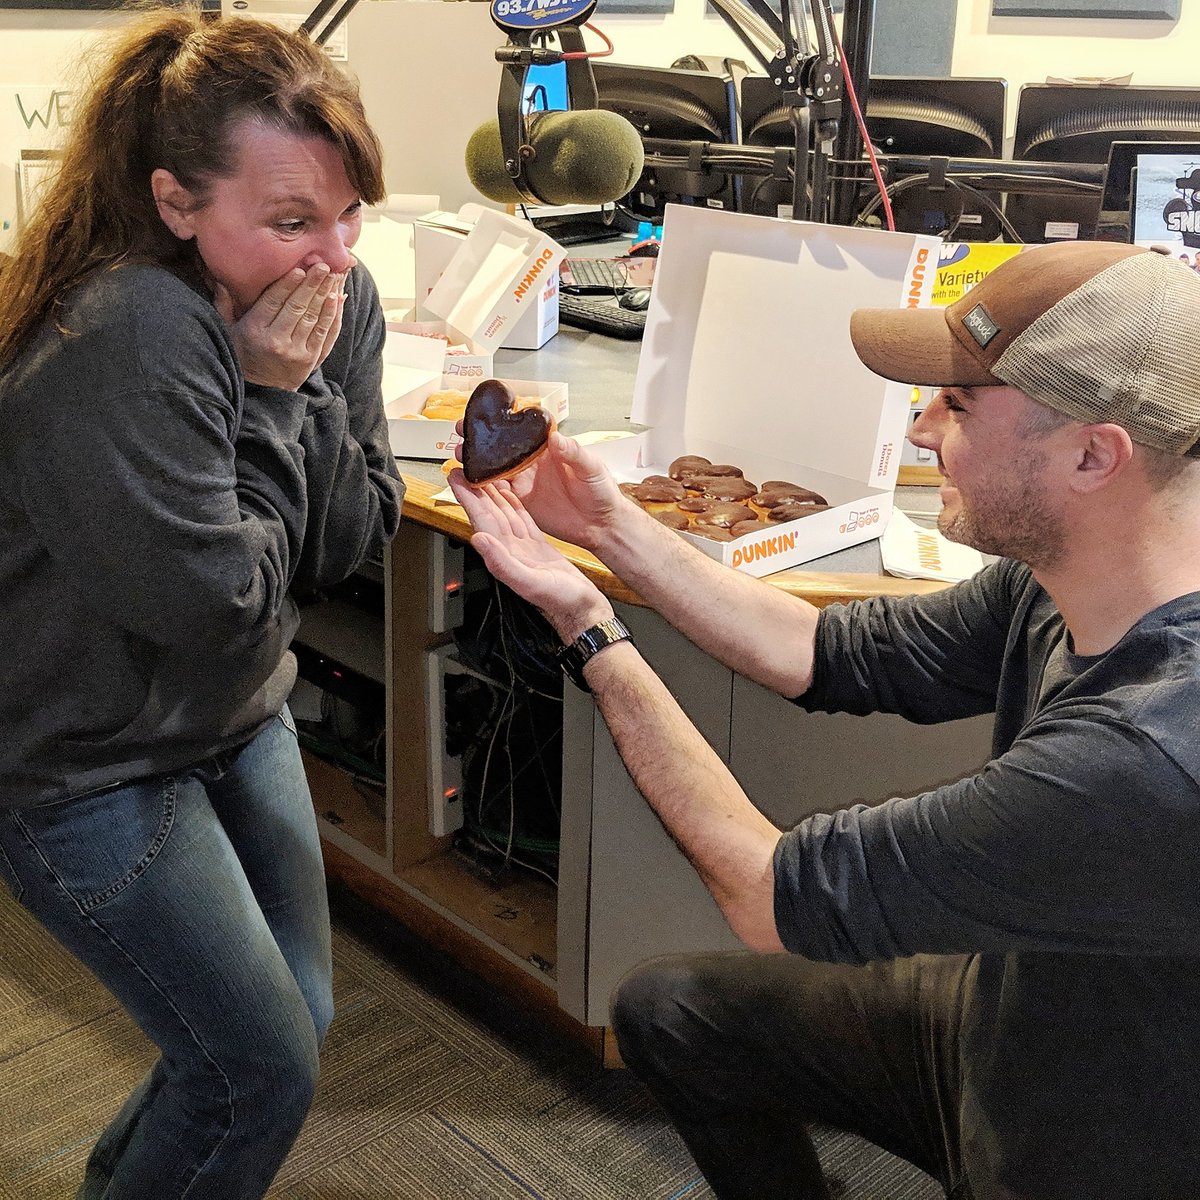 Joe & Nancy are over the moon about Dunkin's Valentine's Day-themed donuts! Did you grab one for your special someone today? 🌙🍩 #dunkin #dunkindonuts #BeMyValentine